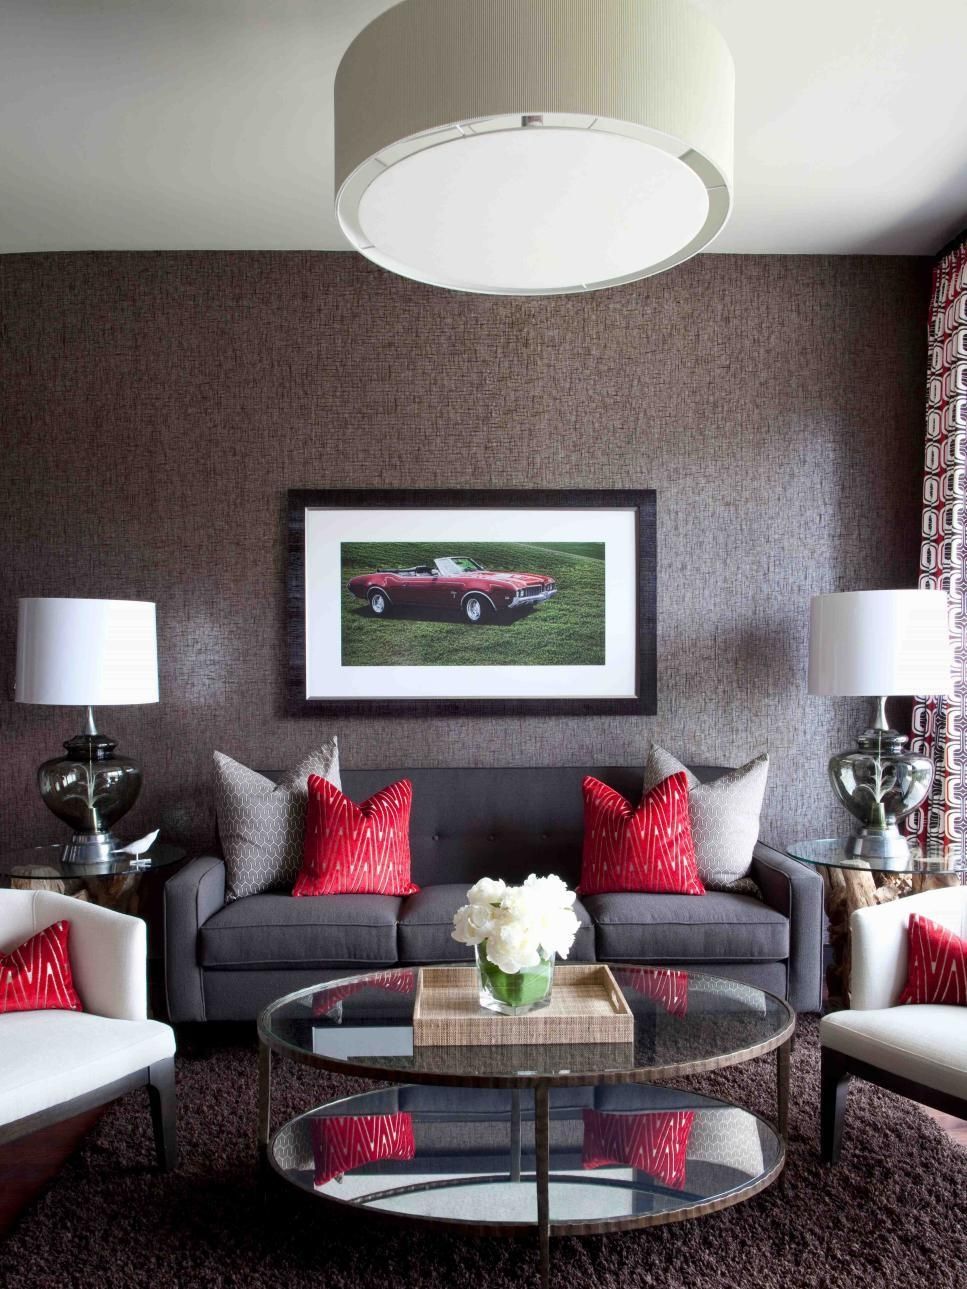 High End Bachelor Pad Decorating On A Budget | Hgtv Throughout Wall Art For Bachelor Pad Living Room (Photo 1 of 20)